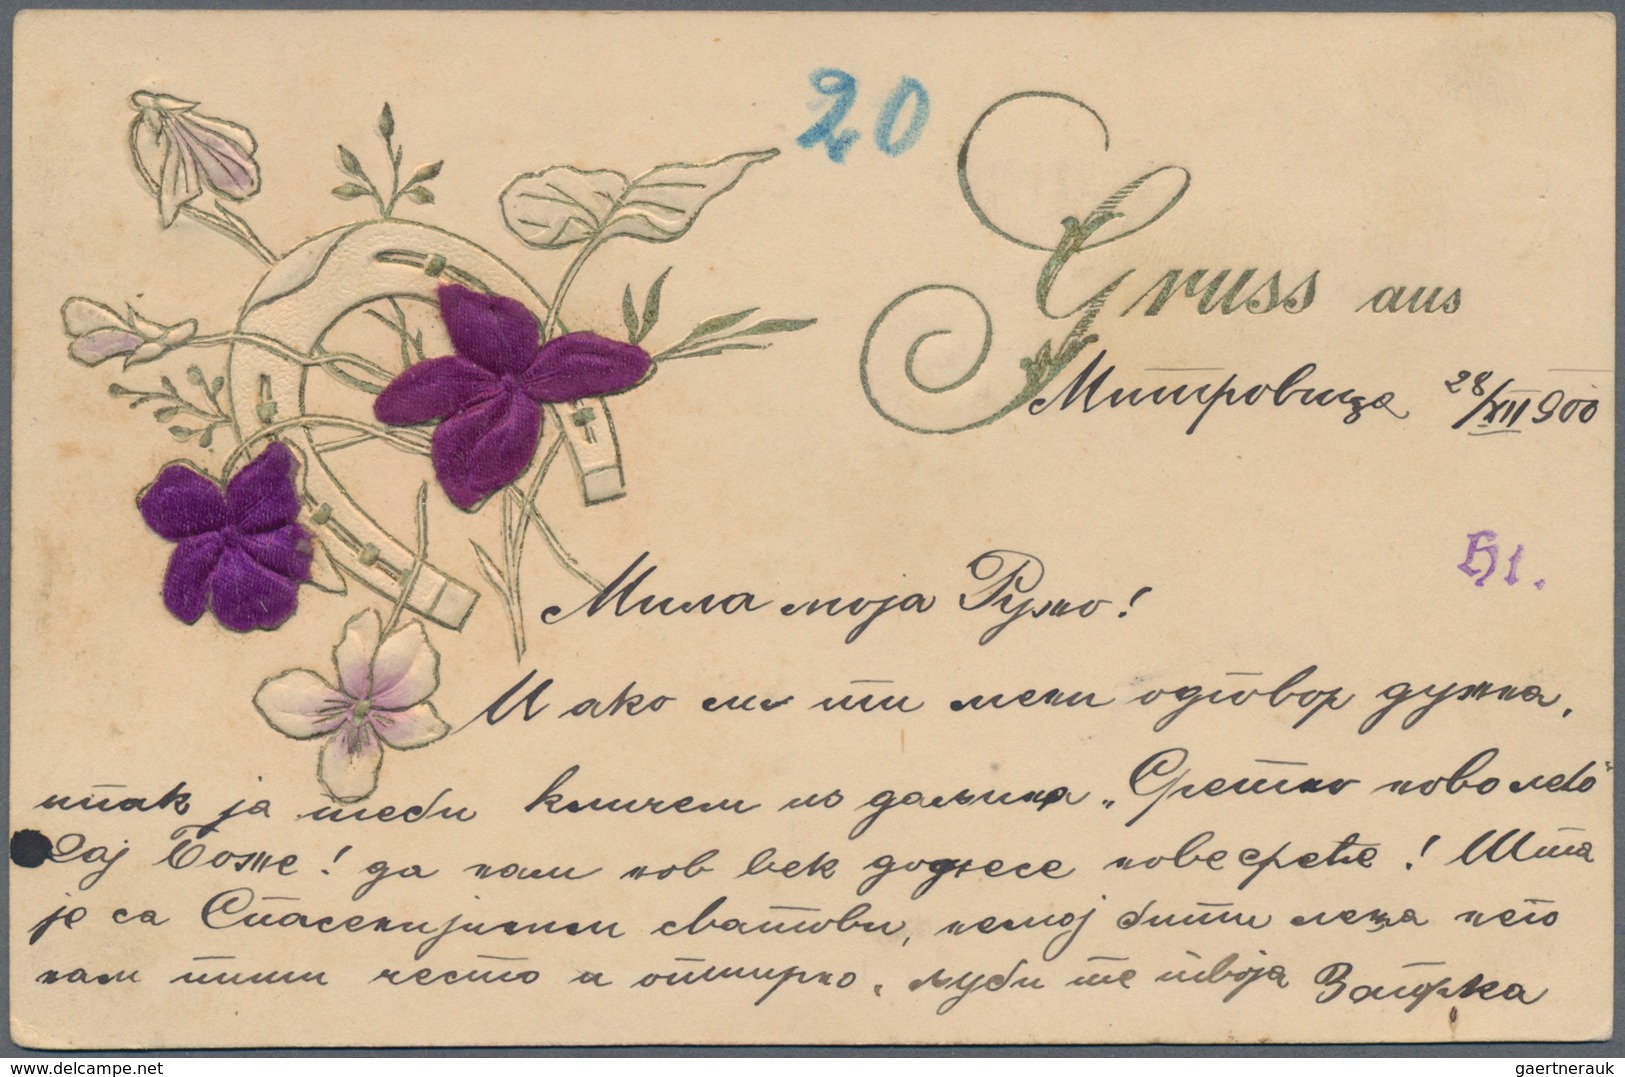 Jugoslawien: 1919/1970, interesting collection of Yugoslavian covers and FDCs, incl. better sets lik